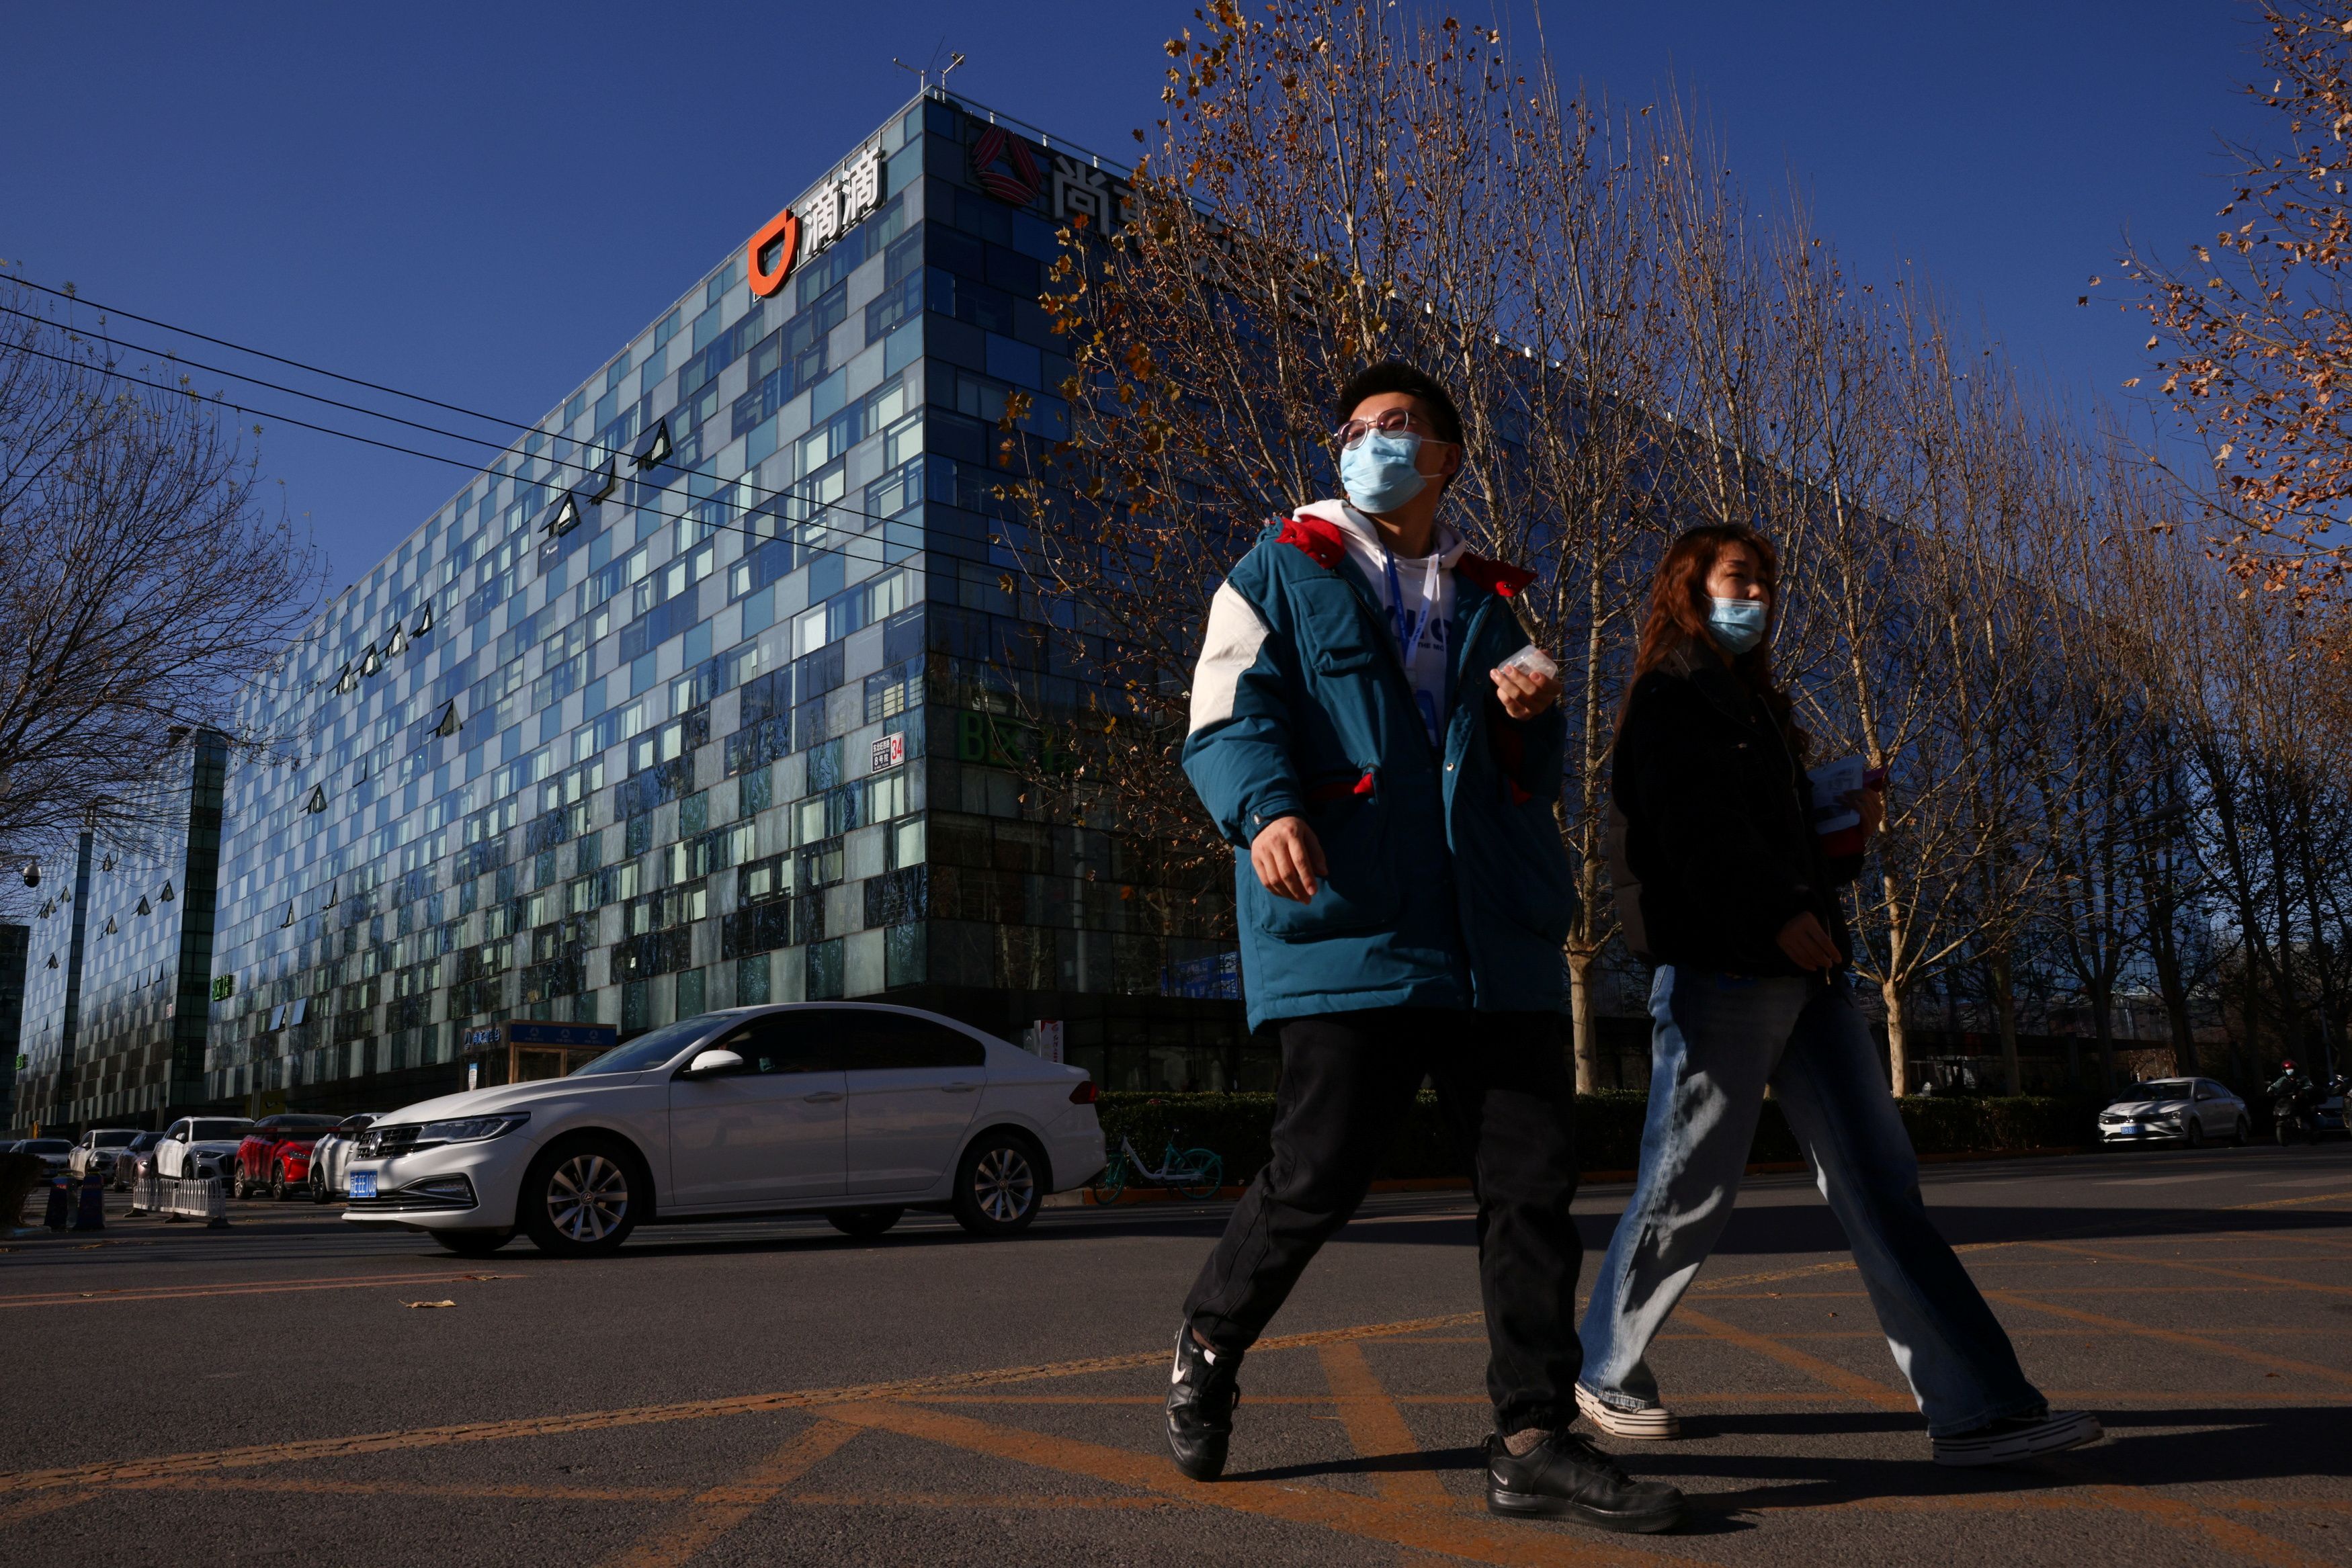 People walk past the headquarters of the Chinese ride-hailing service Didi in Beijing, China, December 3, 2021. REUTERS/Thomas Peter